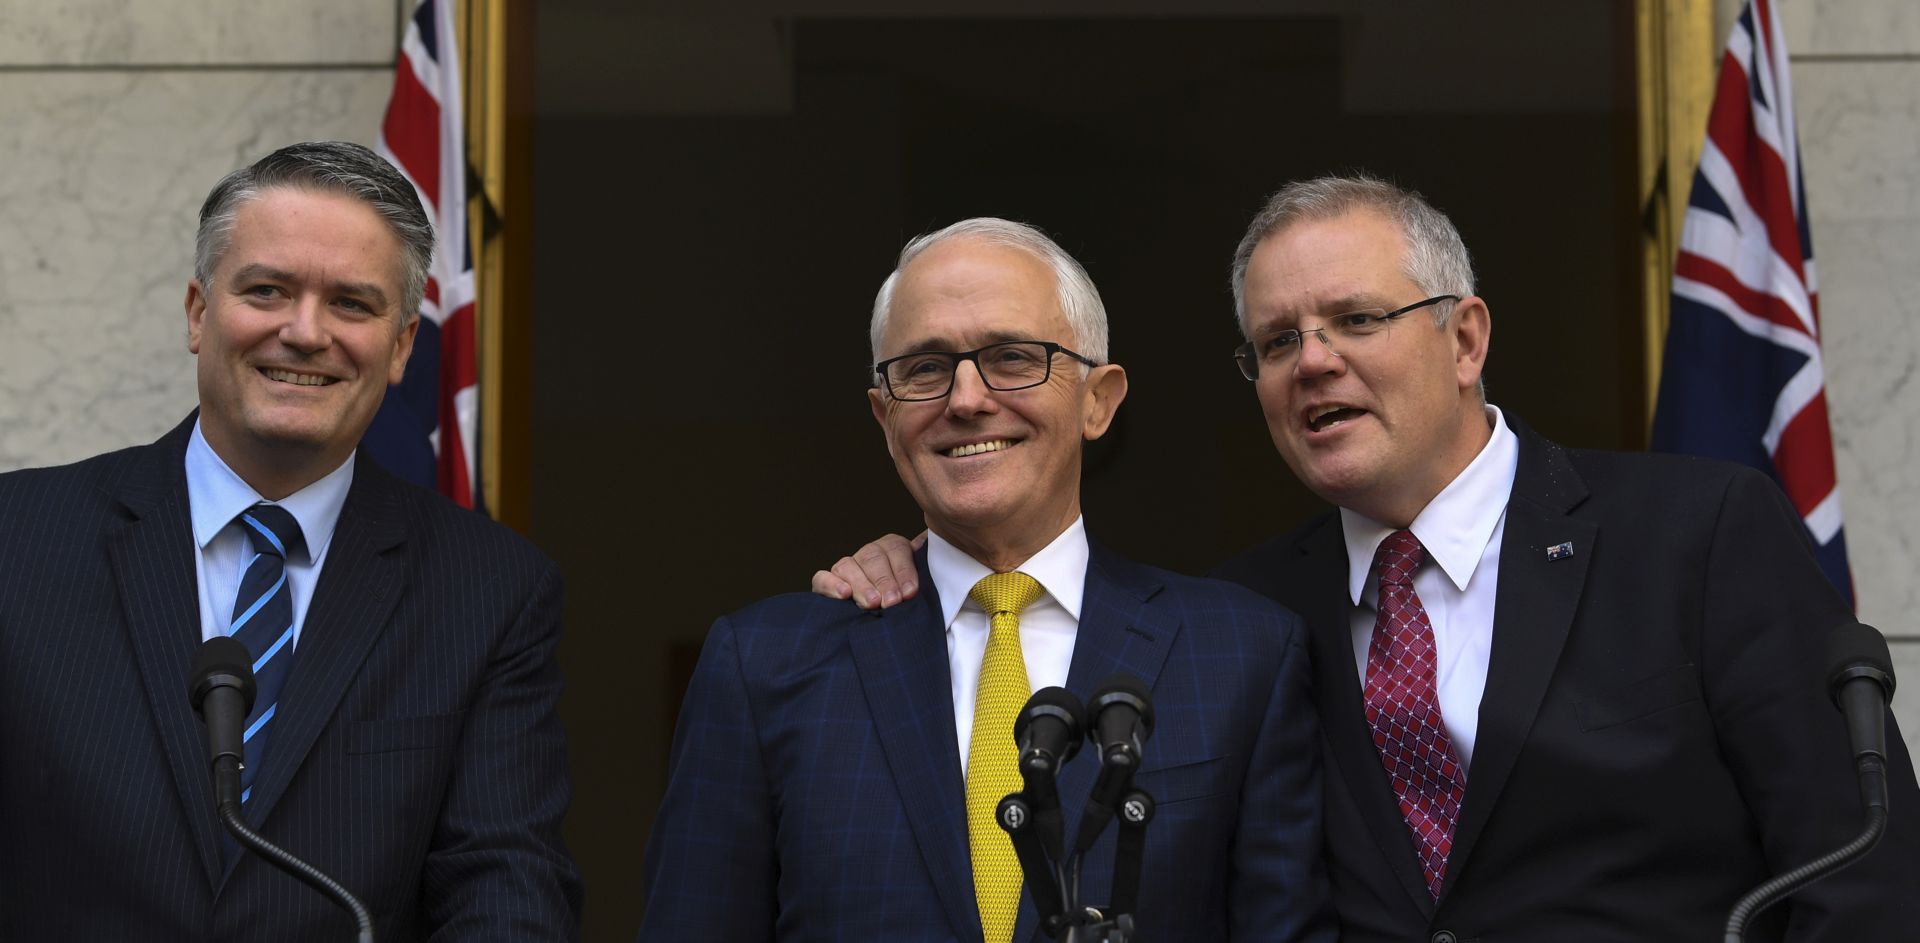 epa06963460 Australian Prime Minister Malcolm Turnbull (C), Australian Finance Minister Mathias Cormann (L) and Australian Federal Treasurer Scott Morrison (R) speak to the media during a press conference at Parliament House in Canberra, Australia, 22 August 2018. According to media reports, Prime Minister Turnbull expressed that he will no longer pursuit corporate tax cuts in the next federal elections, scheduled to take place on or before 02 November 2019.  EPA/LUKAS COCH  AUSTRALIA AND NEW ZEALAND OUT